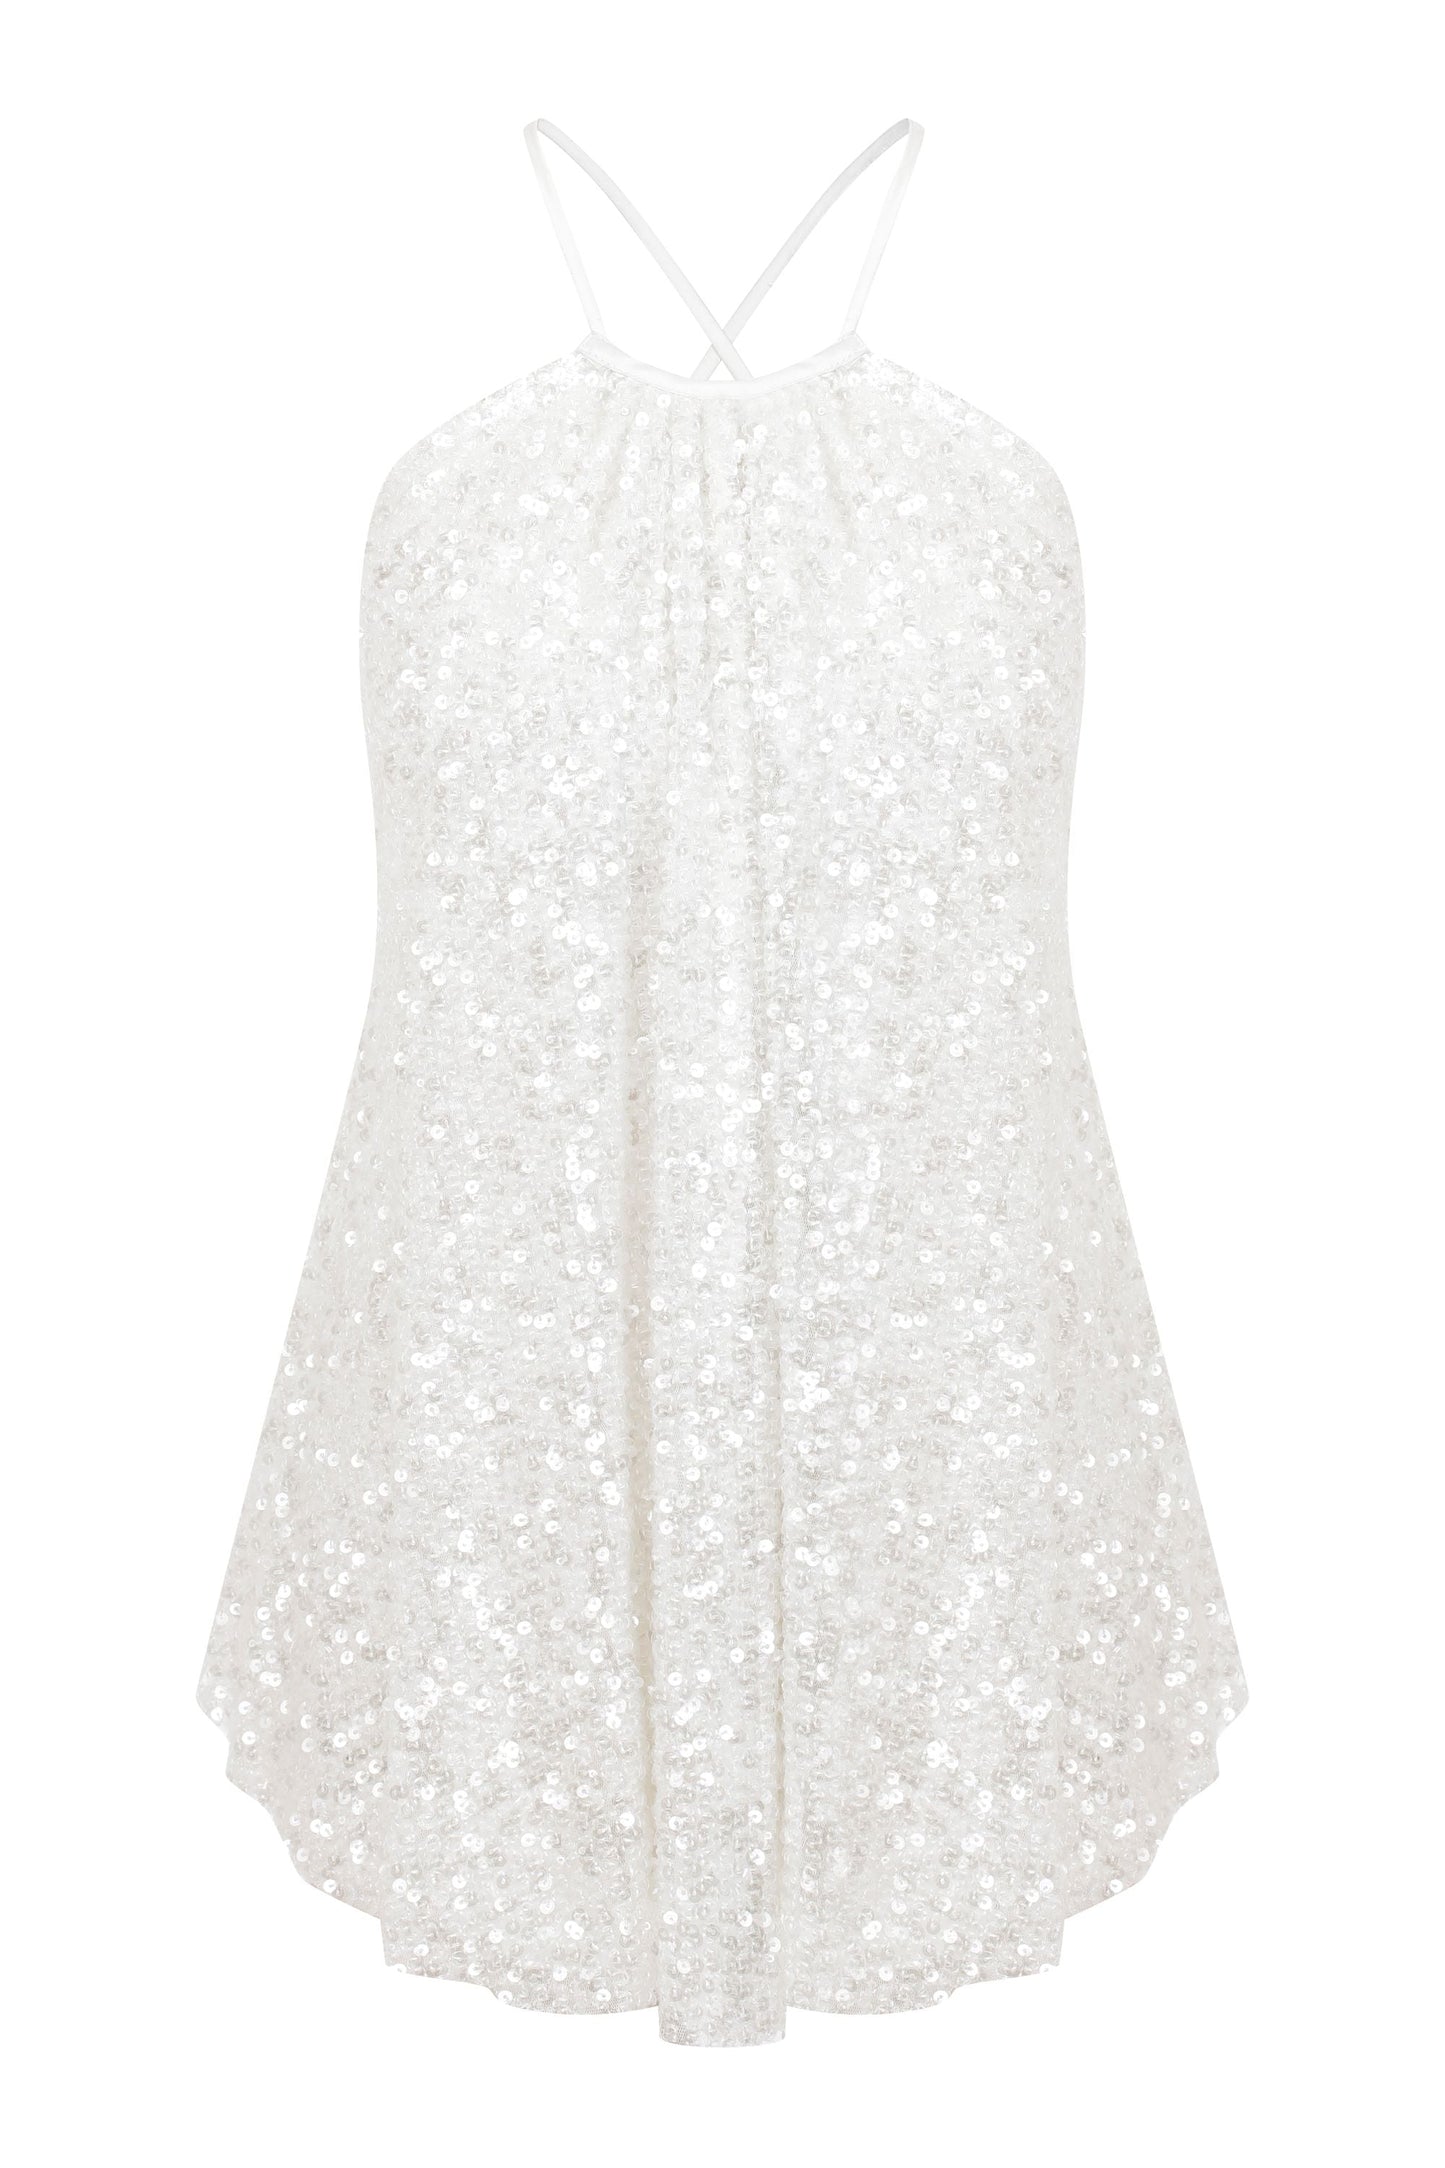 Lycee Sequin Top in Crysyal White